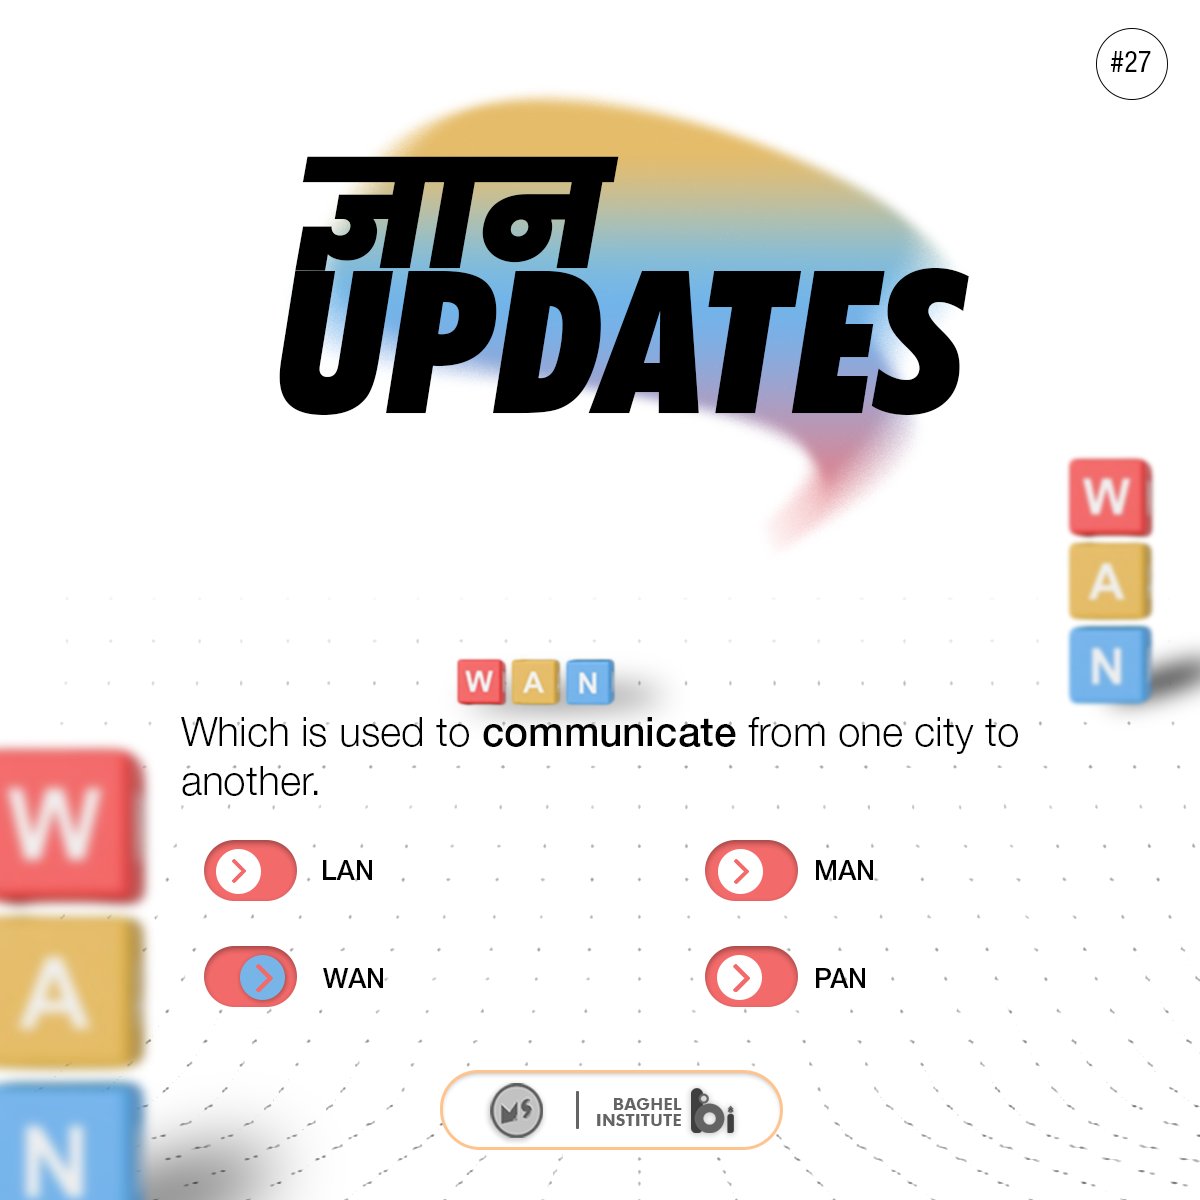 WAN is used to communicate from one city to another !!!
#TechQuiz #quiztime #trivia #quiznight #quizzing #quizfun #quizzy #quizmaster #pubquiz #quizaddict #quizchallenge #quizzical #quiz #quizup #boostyourknowledge #study #learn #gyanupdate #baghelcomputercentre #miniatureschool